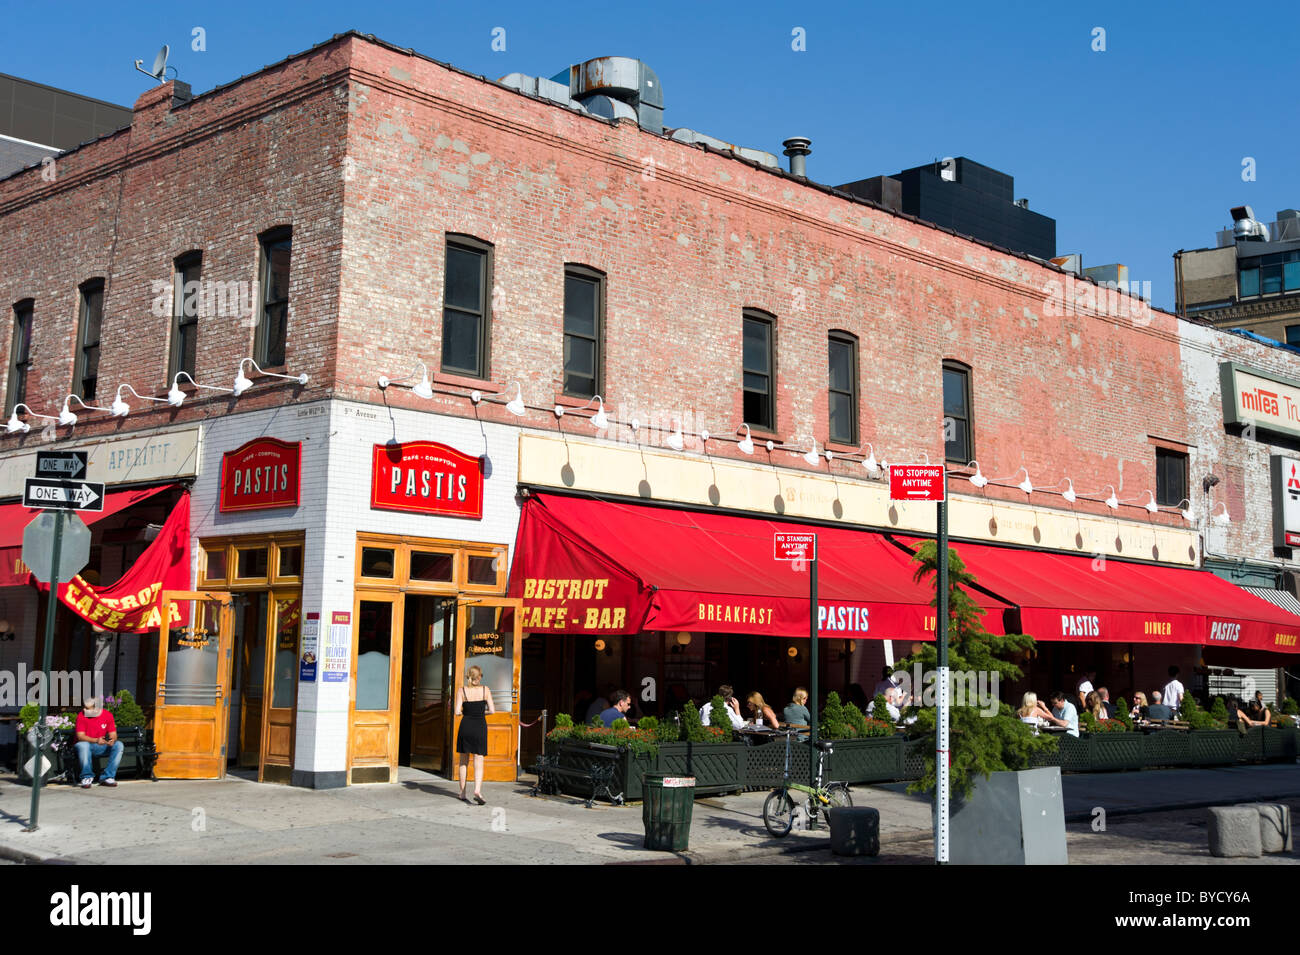 Pastis bistro on 9th Avenue in the Meatpacking District, New York City, America, USA Stock Photo